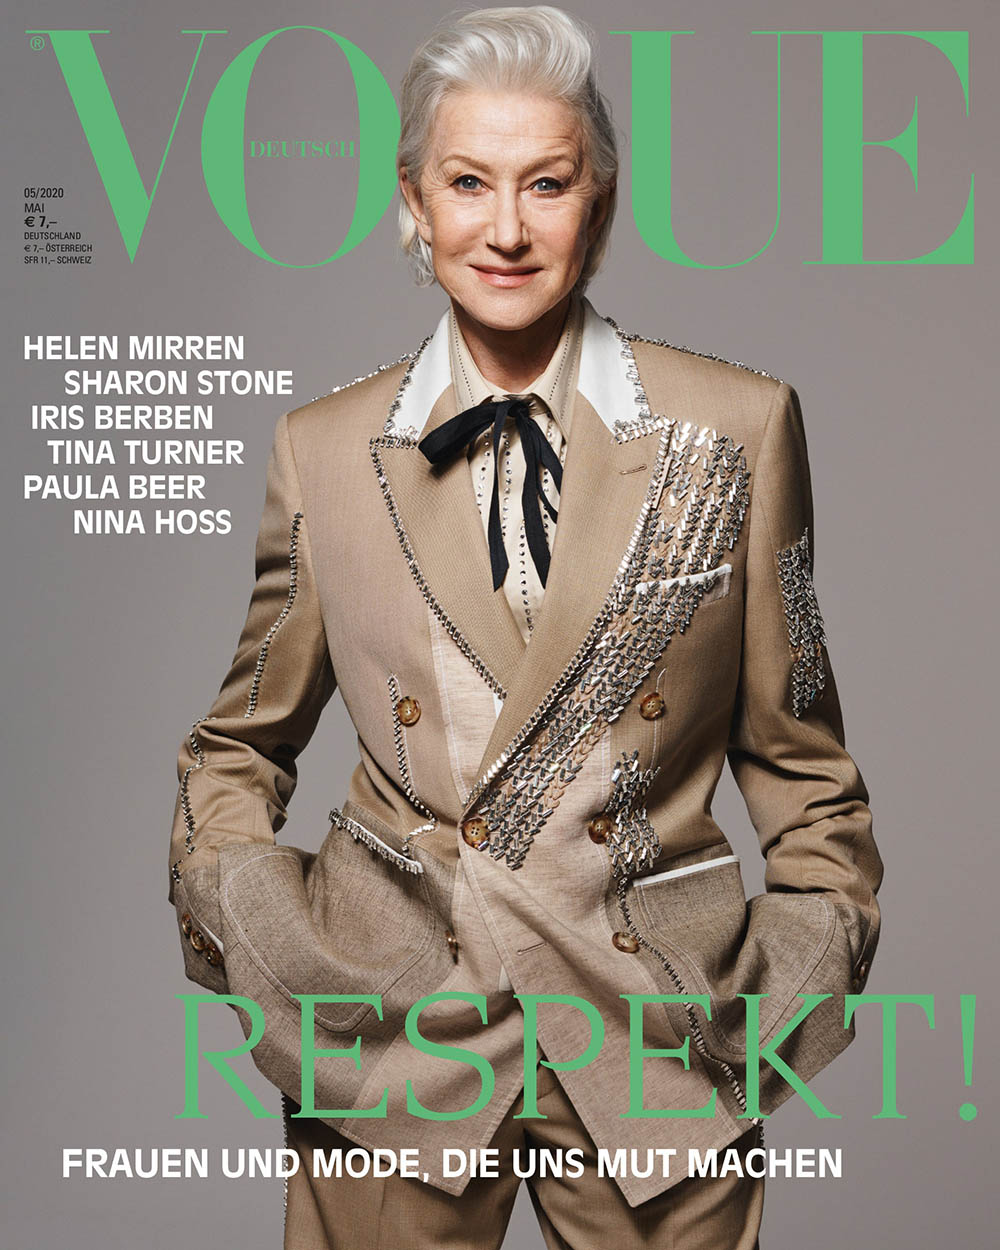 Helen Mirren covers Vogue Germany May 2020 by Liz Collins